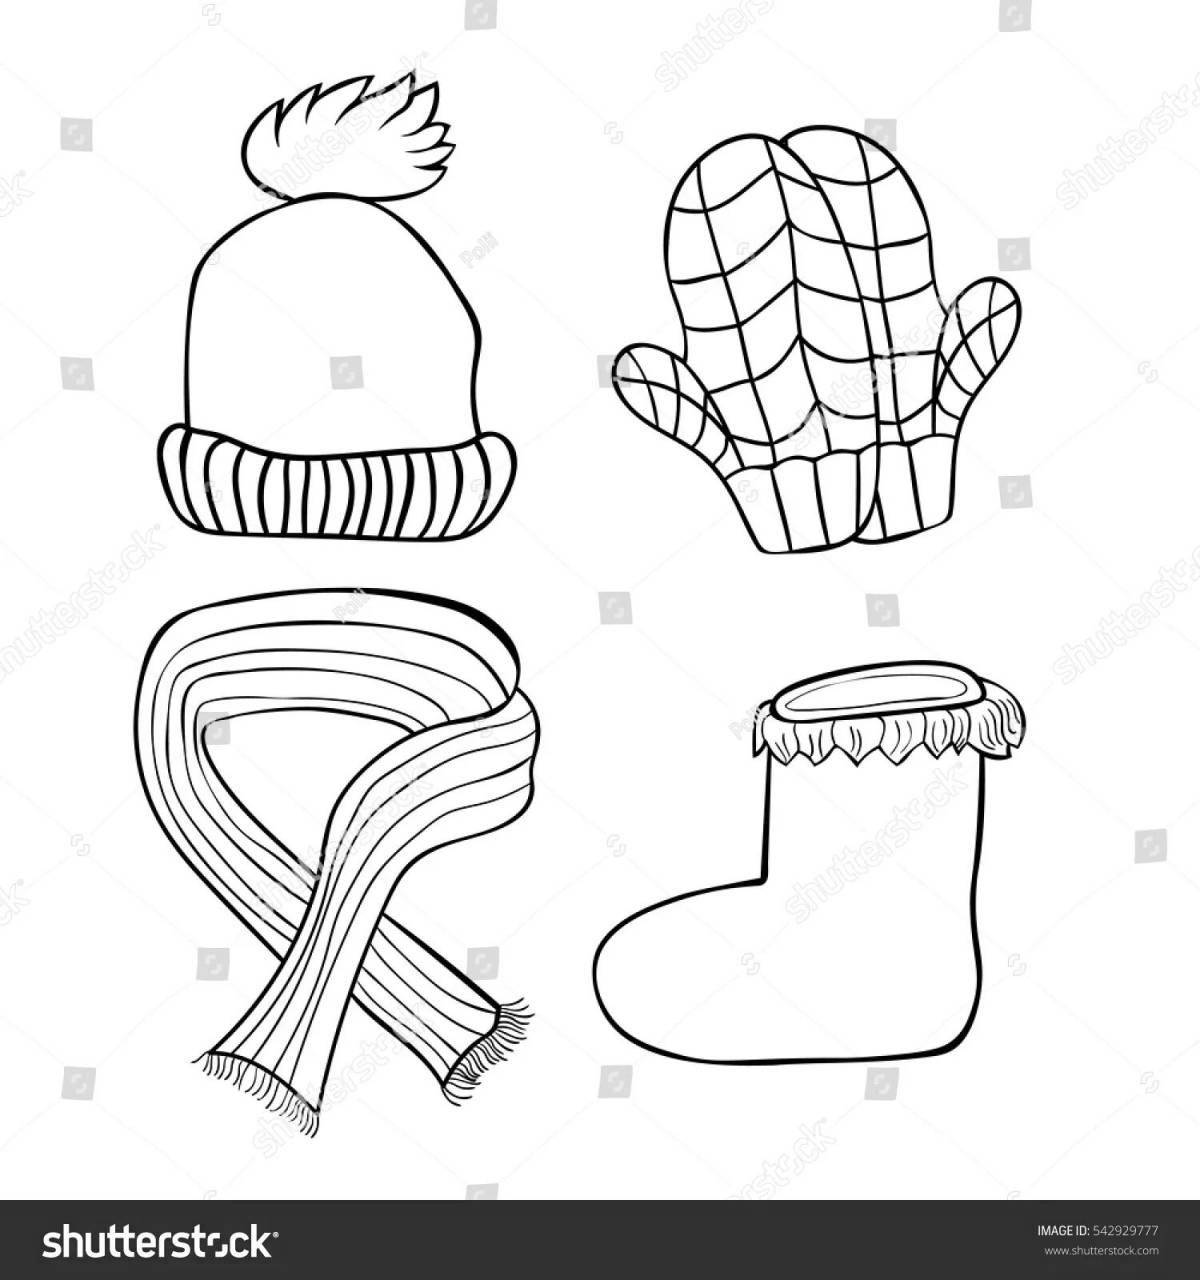 Colorful mittens and hat coloring pages for kids